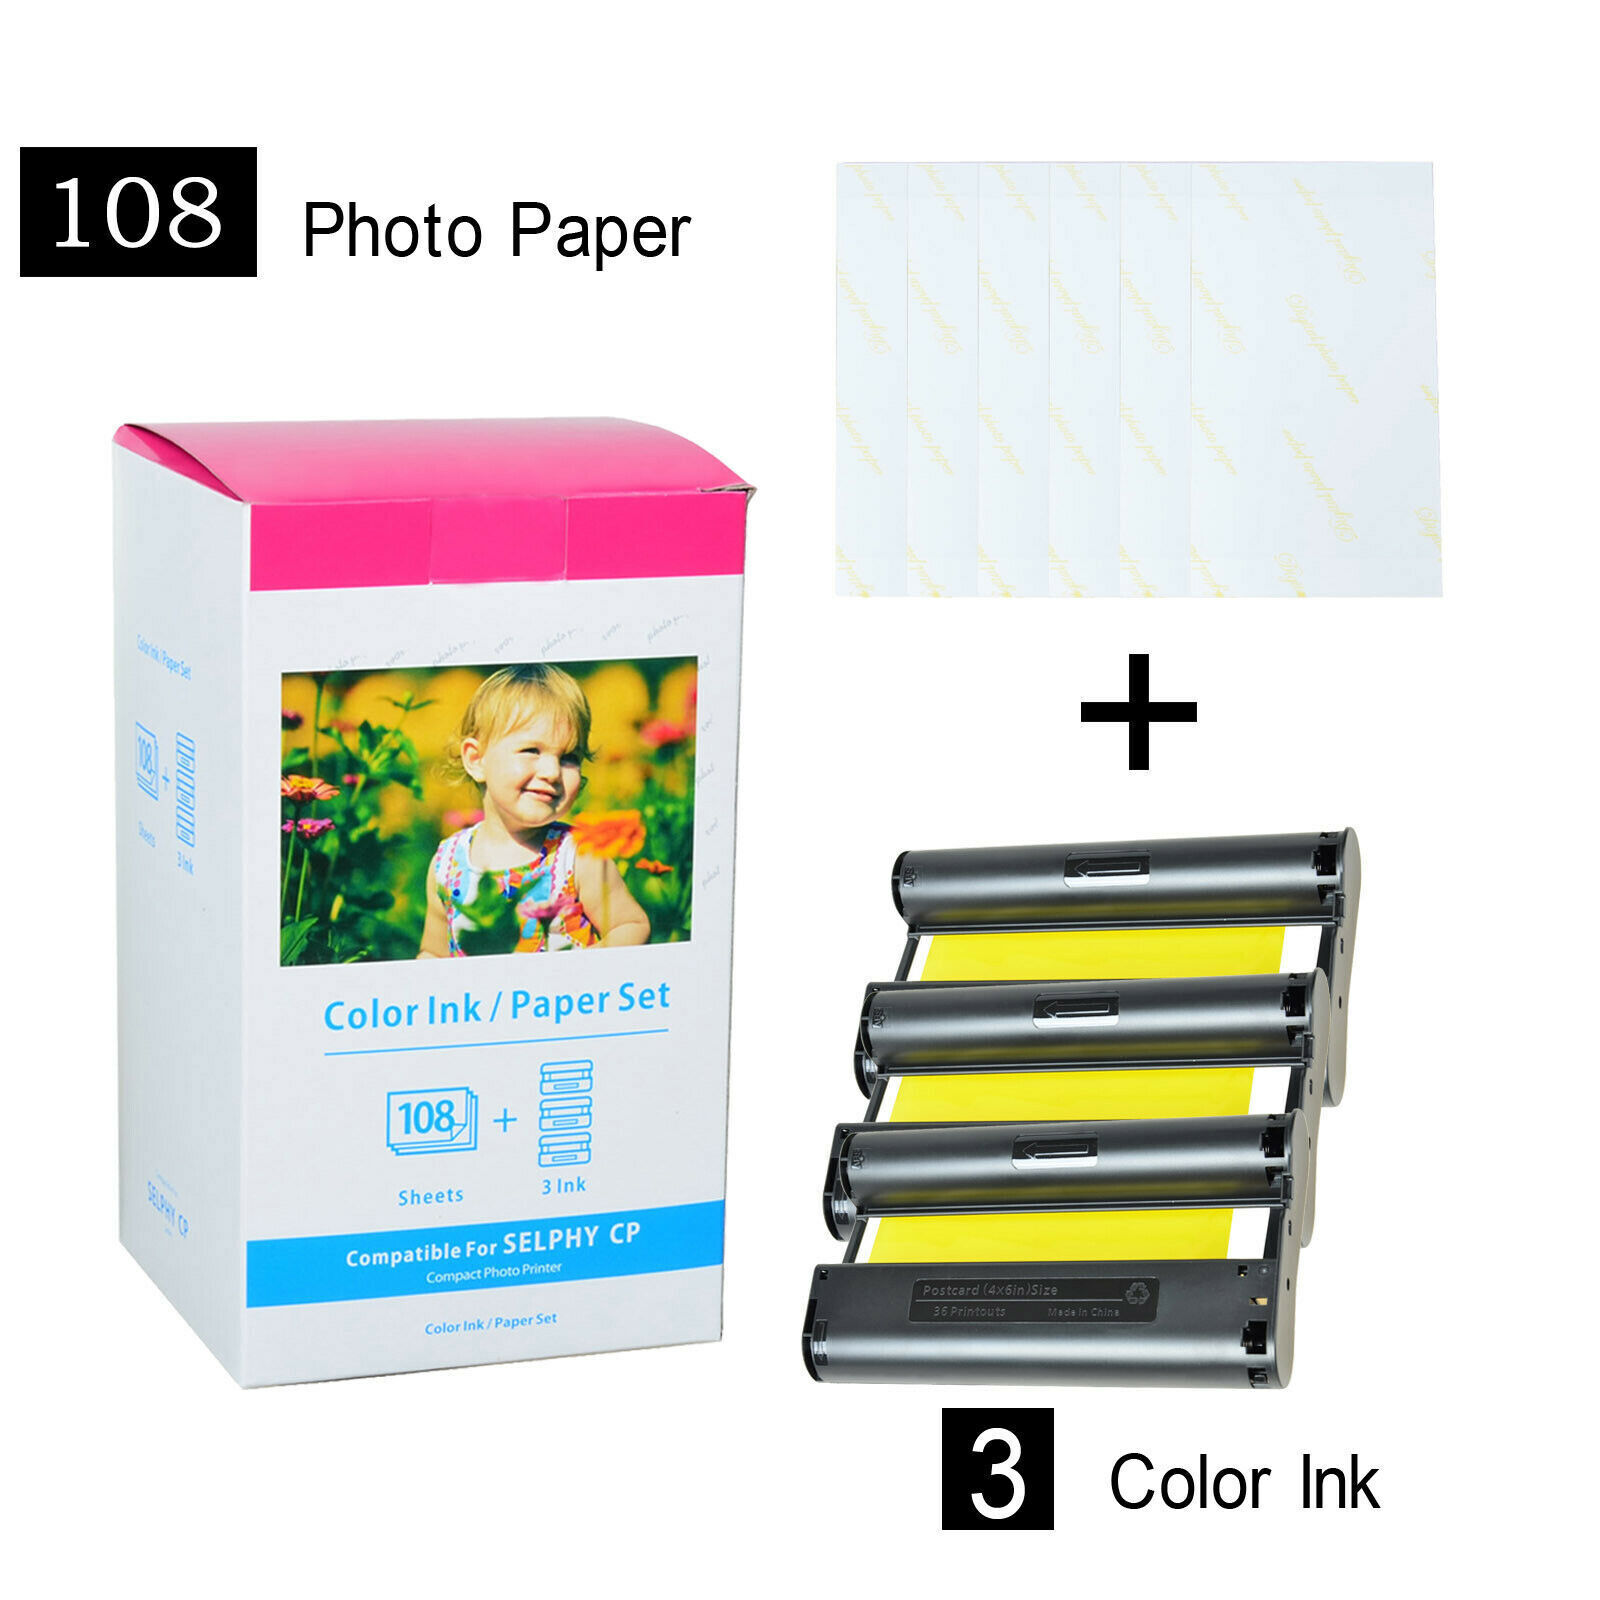 Compatible Canon Selphy CP1300 KP-108IN KP-36IP Color Ink Photo Paper Set 4X6in